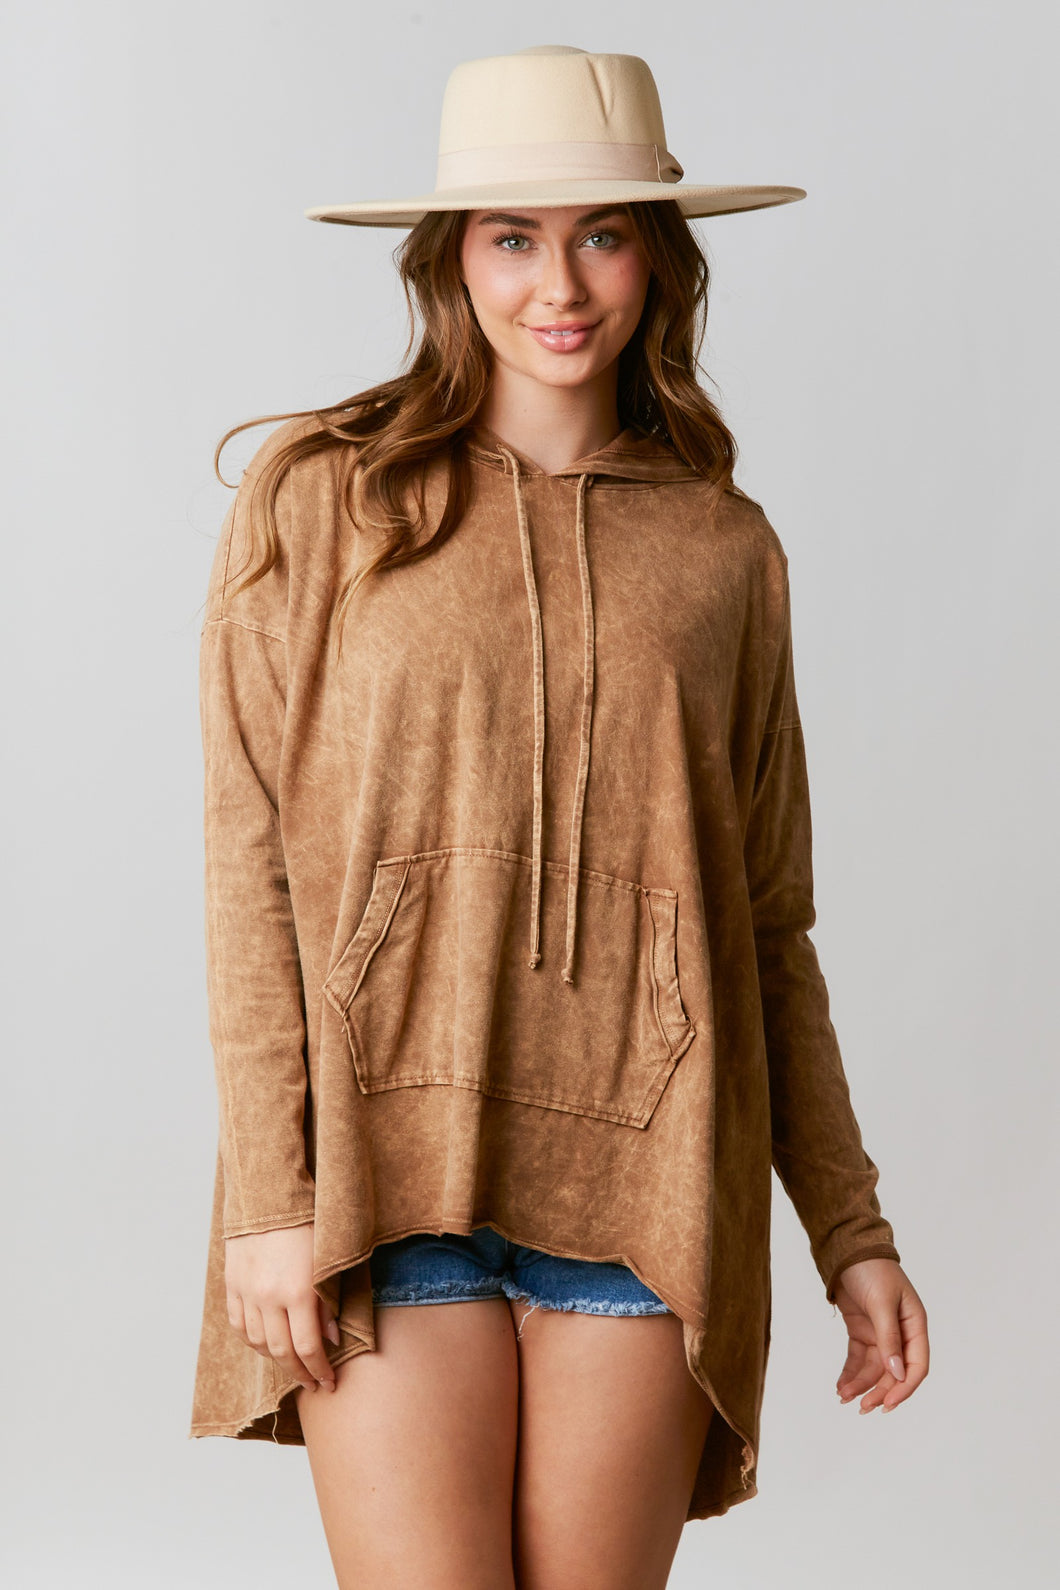 Fantastic Fawn Mineral Washed Cotton Jersey Hooded Loose Fit Top in Camel Shirts & Tops Fantastic Fawn   